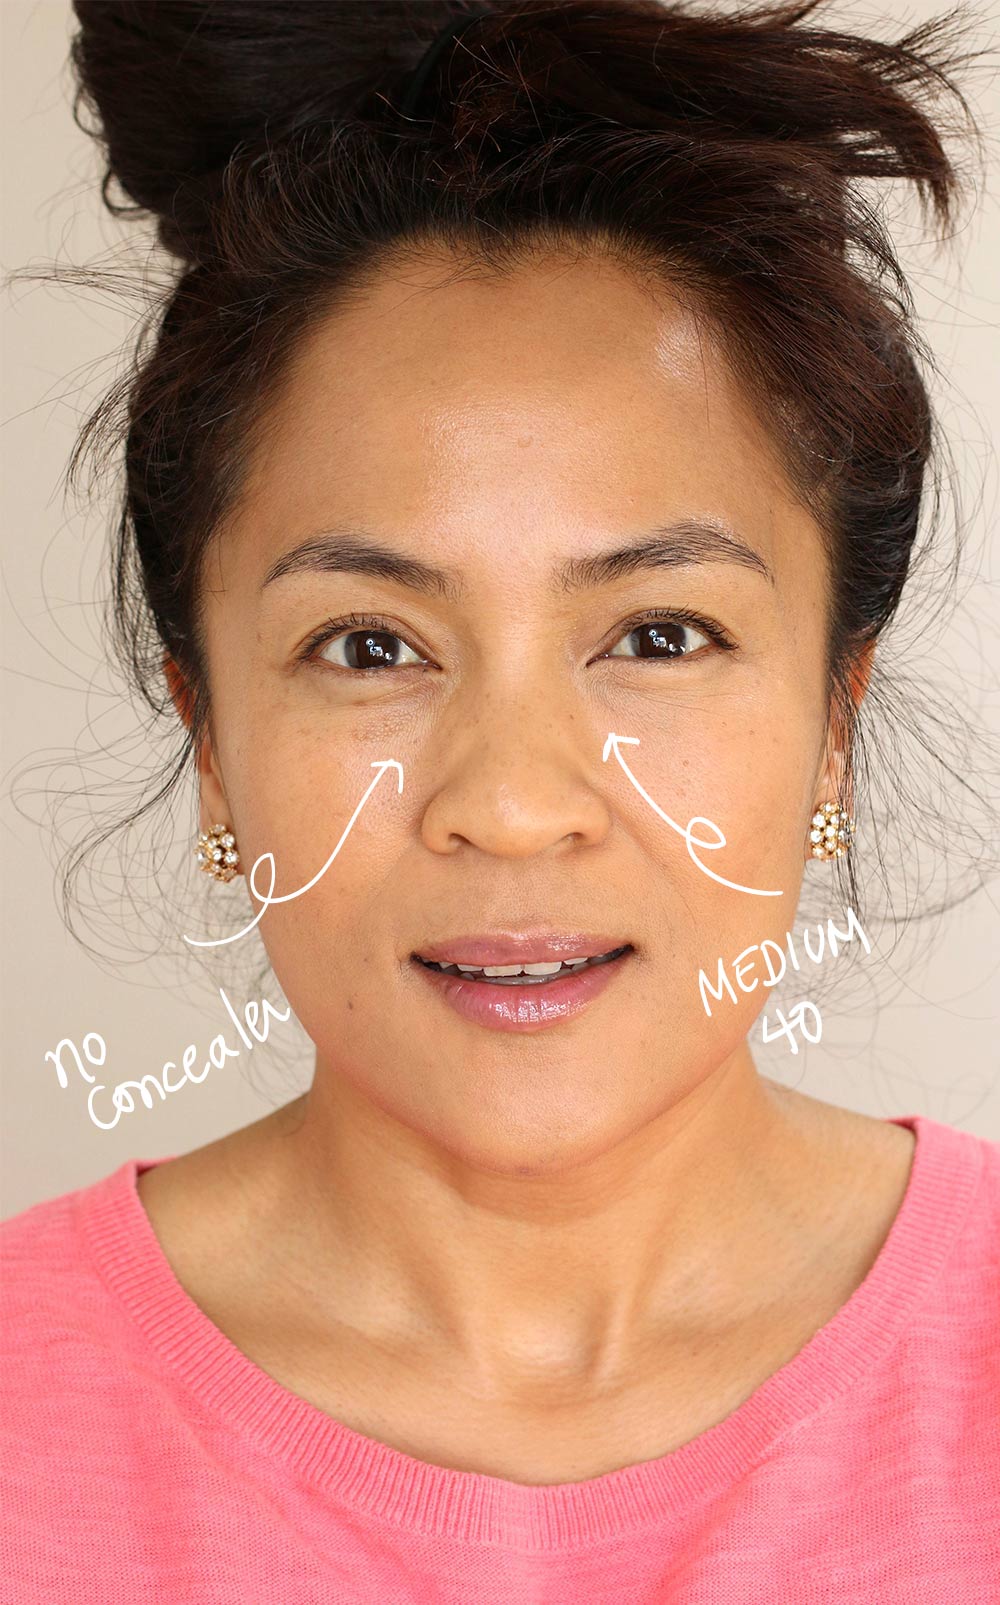 neutrogena hydro boost hydrating concealer before and after